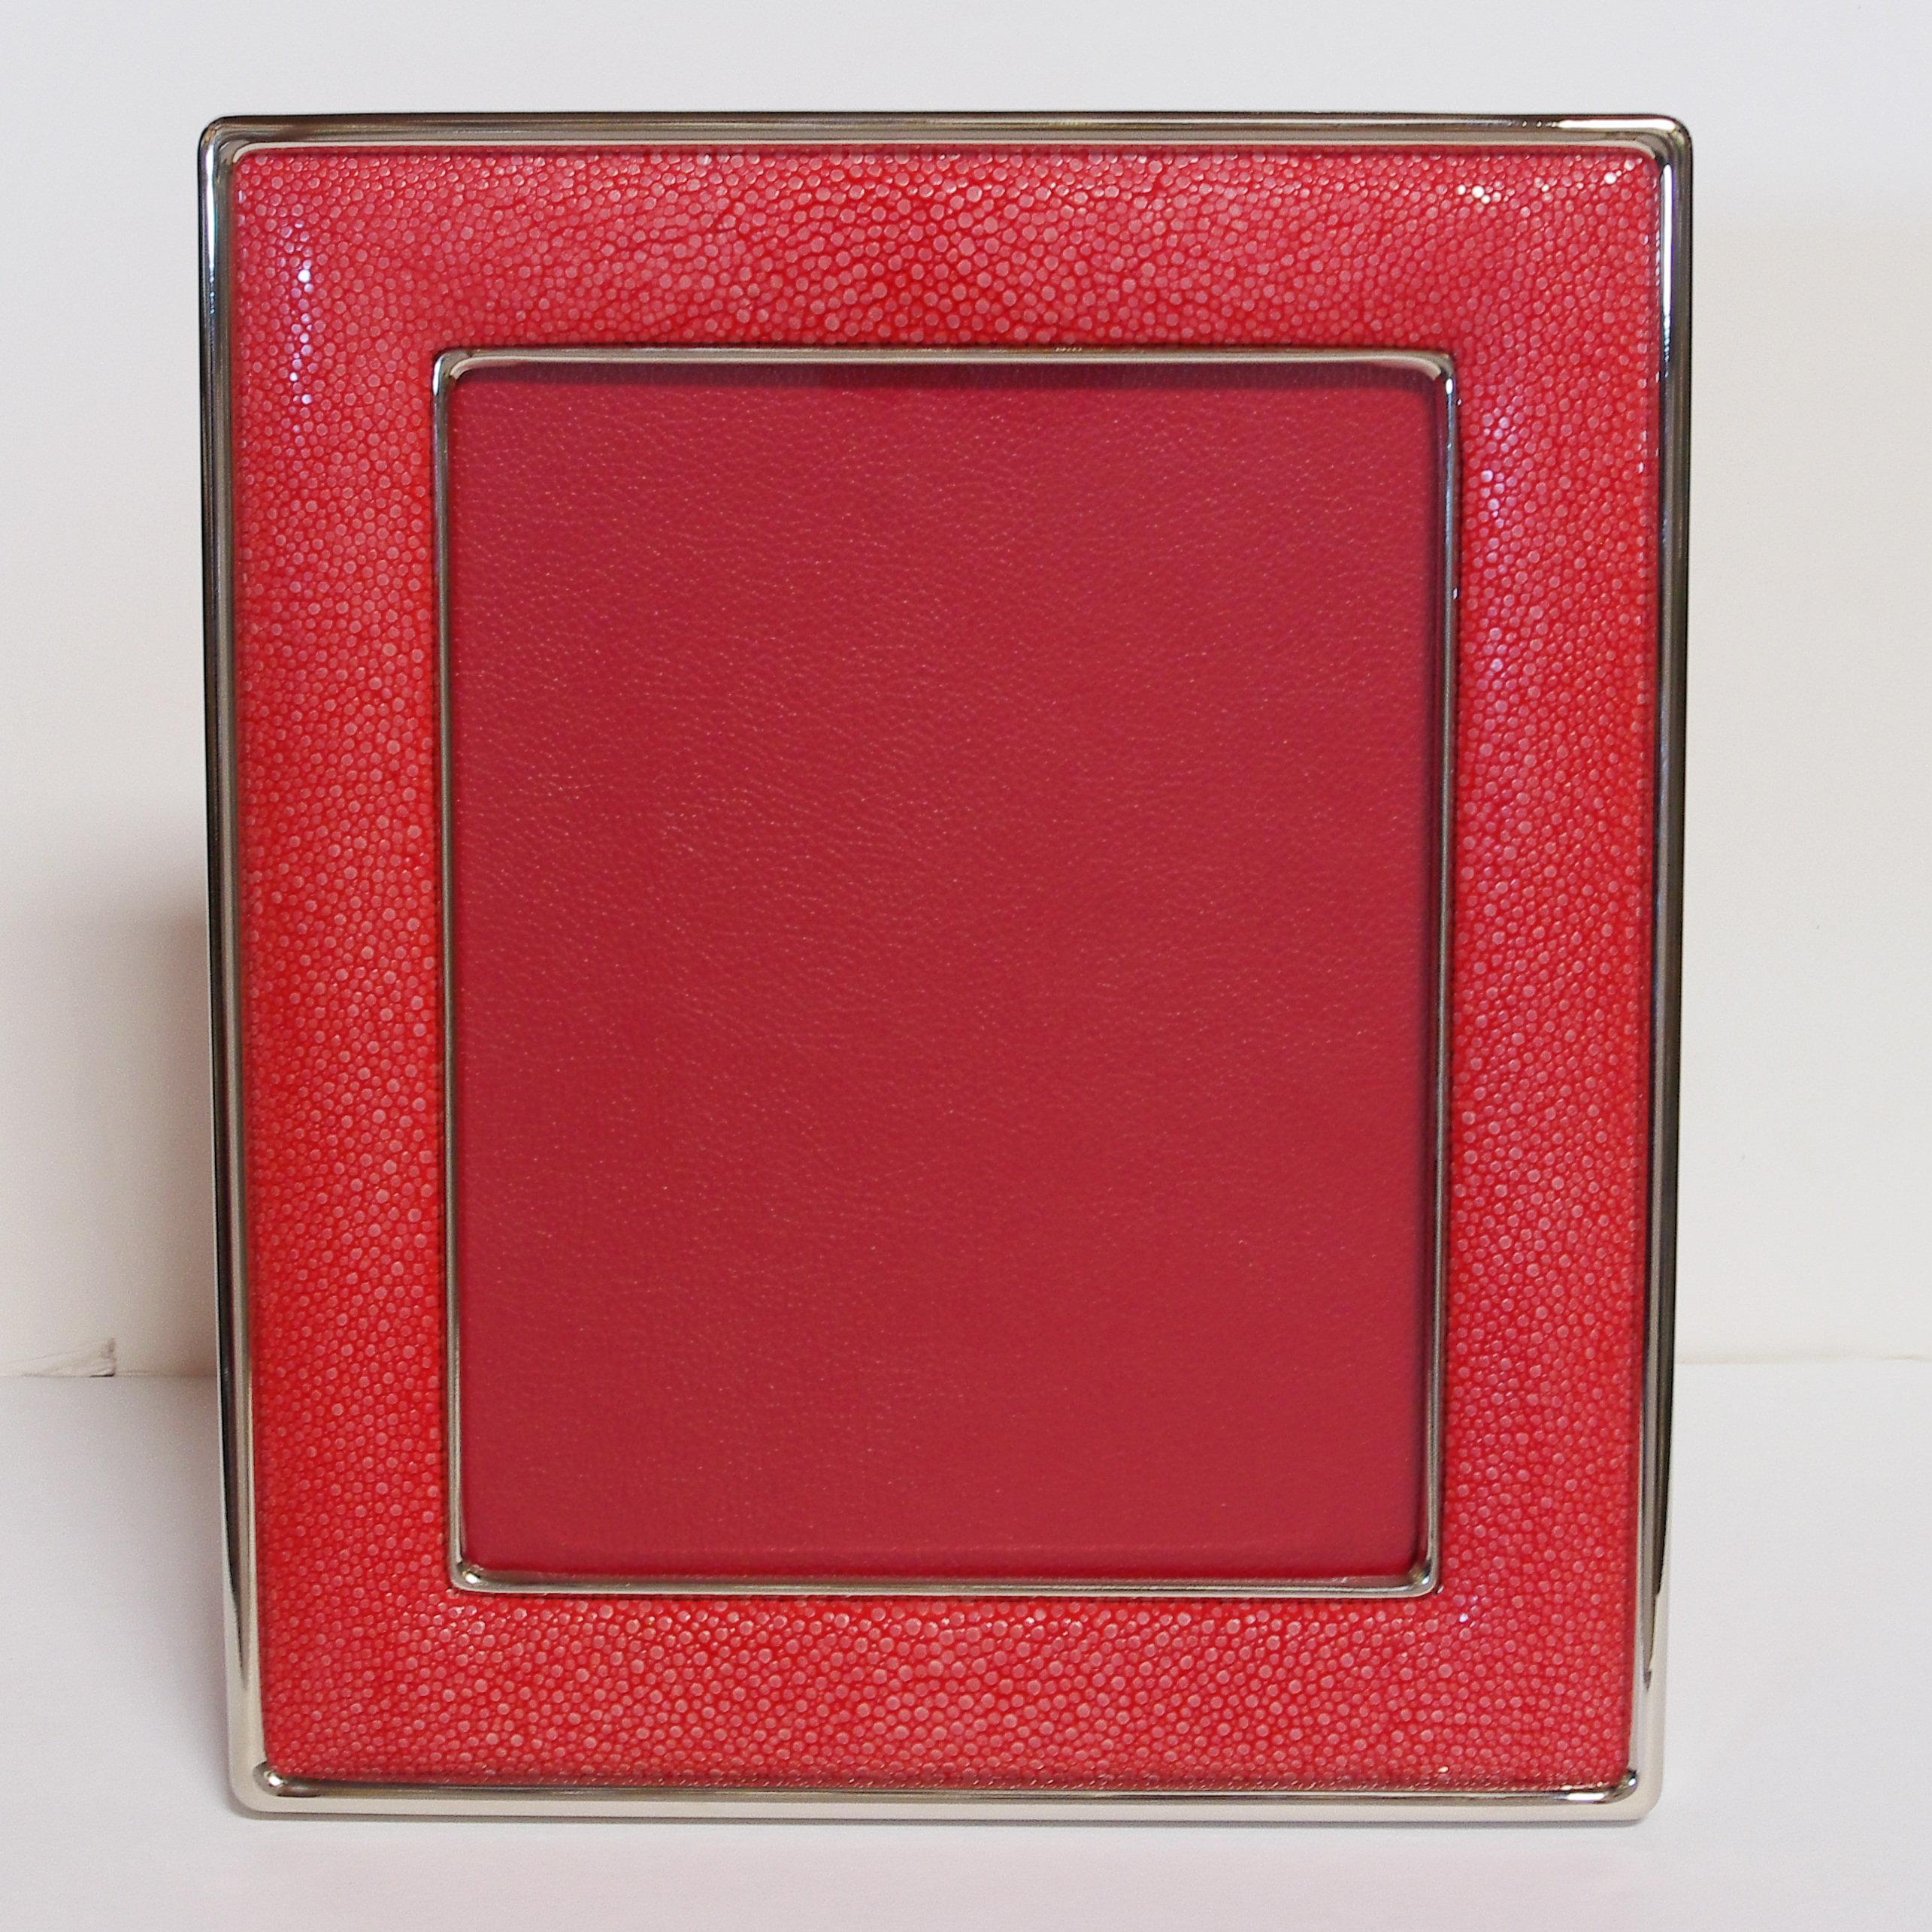 Red shagreen leather and nickel plated photo frame with presentation red leather box by Fabio Ltd
Height: 13 inches / Width: 11.5 inches / Depth: 1 inch 
Photo Size: 8 inches by 10 inches
LAST 2 in stock in Los Angeles
Order Reference #: FABIOLTD